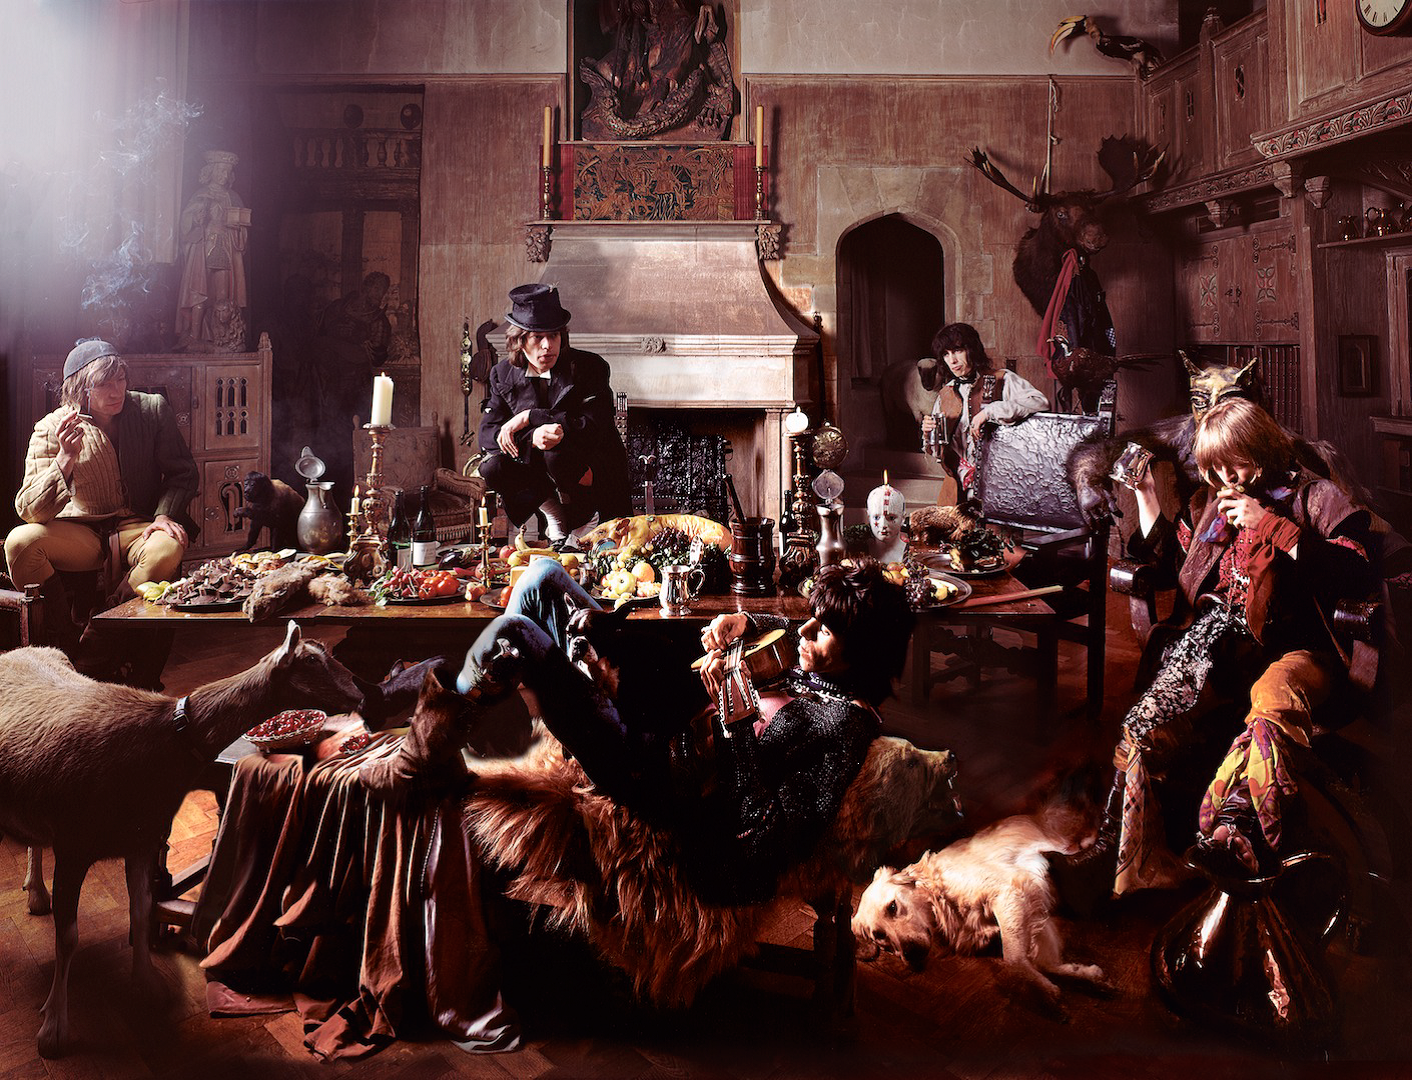 The Rhapsody meets Michael Joseph, the world-renowned photographer behind the Beggars Banquet images of The Rolling Stones’ infamous photoshoot of 1968.